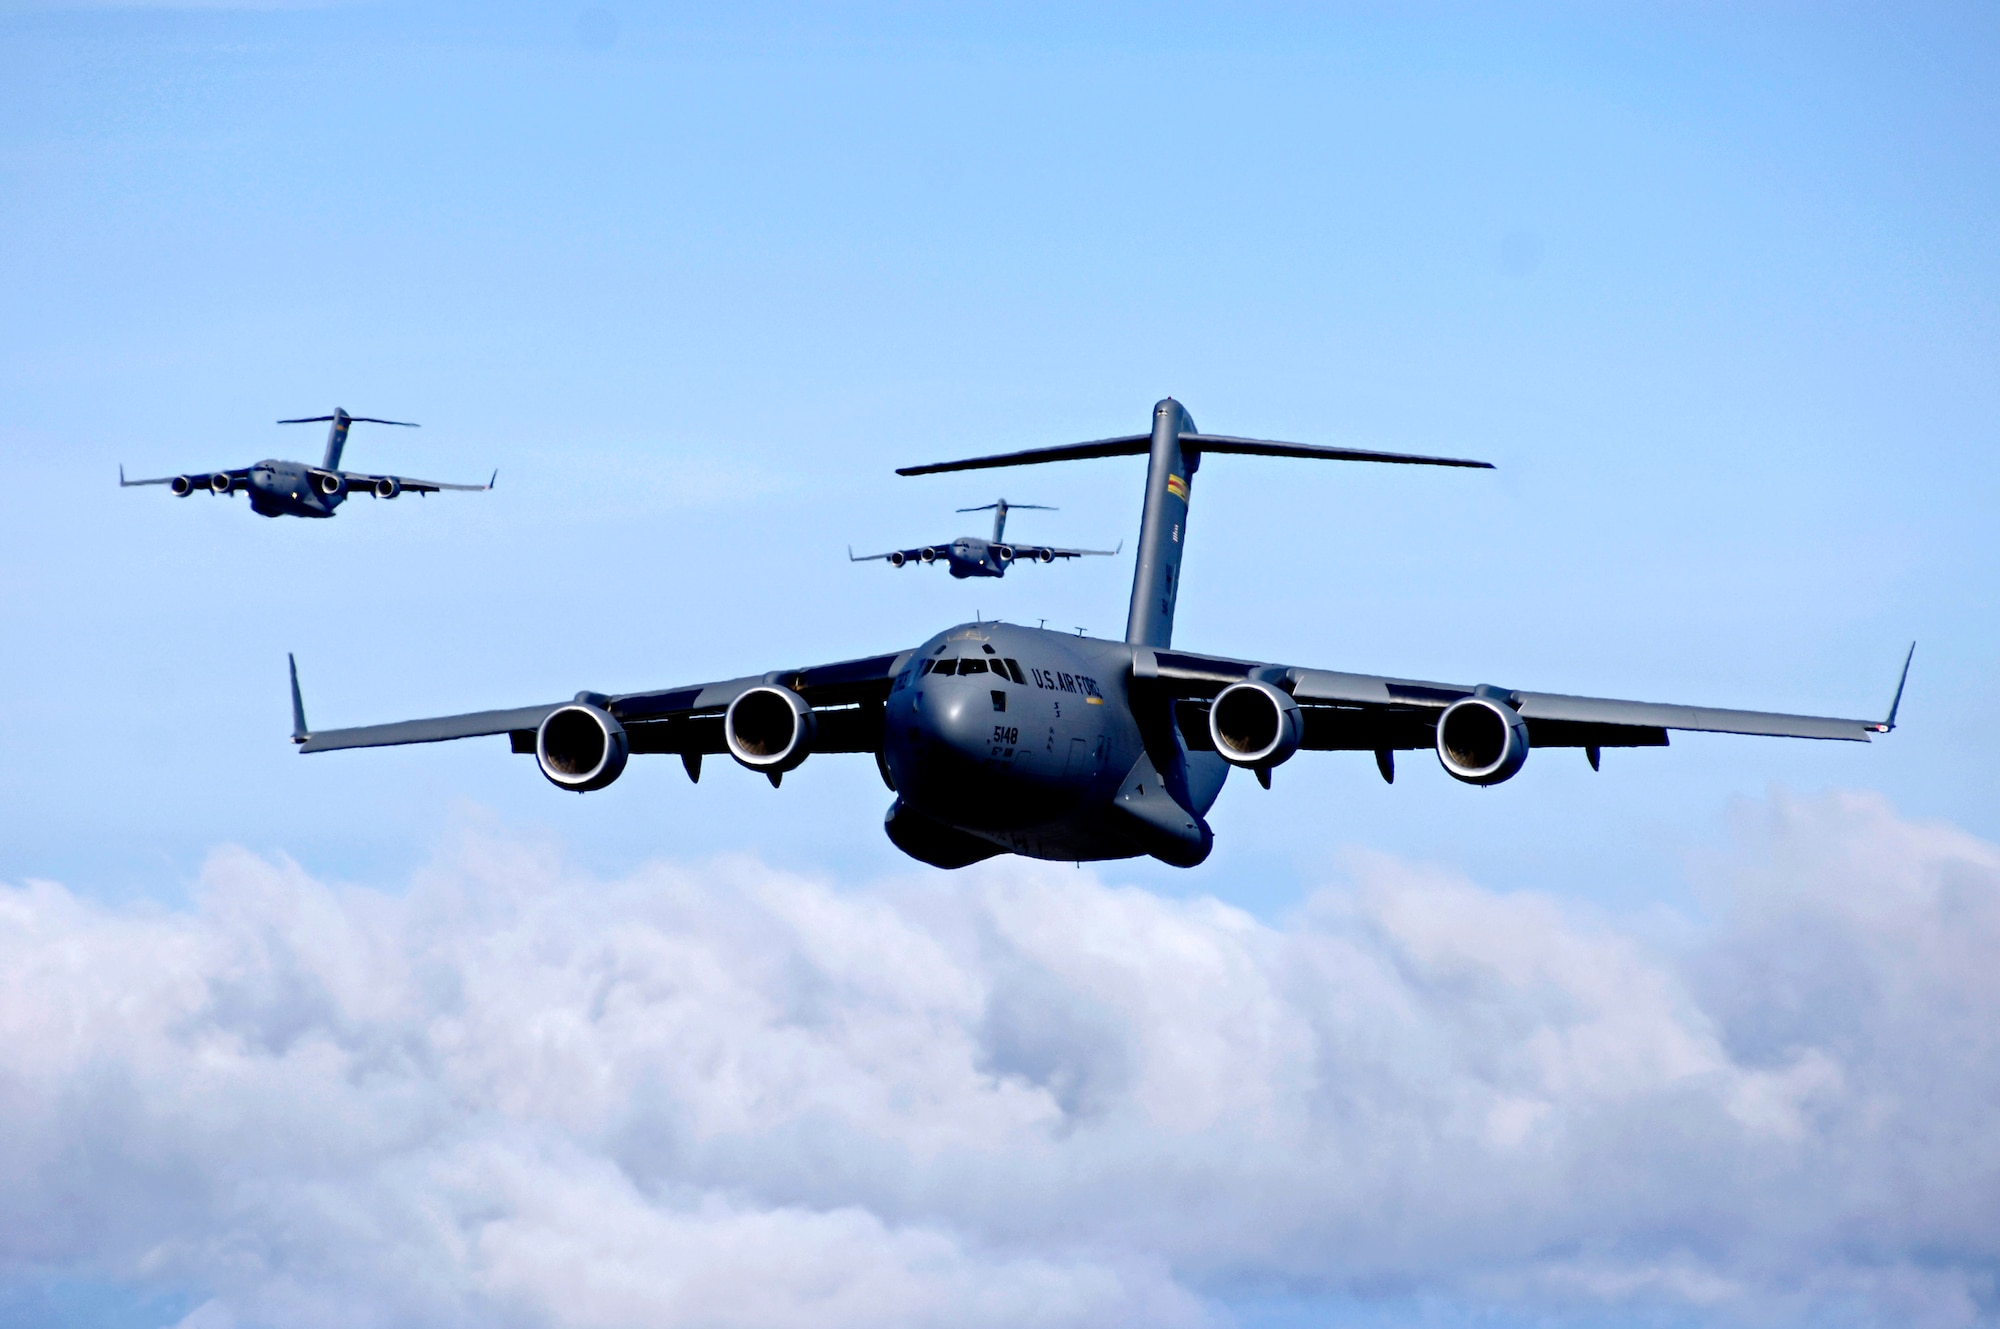 C-17 Globemaster IIIs fly in an airdrop training mission. Dover Air Force Base in Delware is preparing to receive the first of 13 C-17 Globemaster IIIs scheduled to arrive this summer. (U.S. Air Force photo/Tech. Sgt. Shane A. Cuomo) 